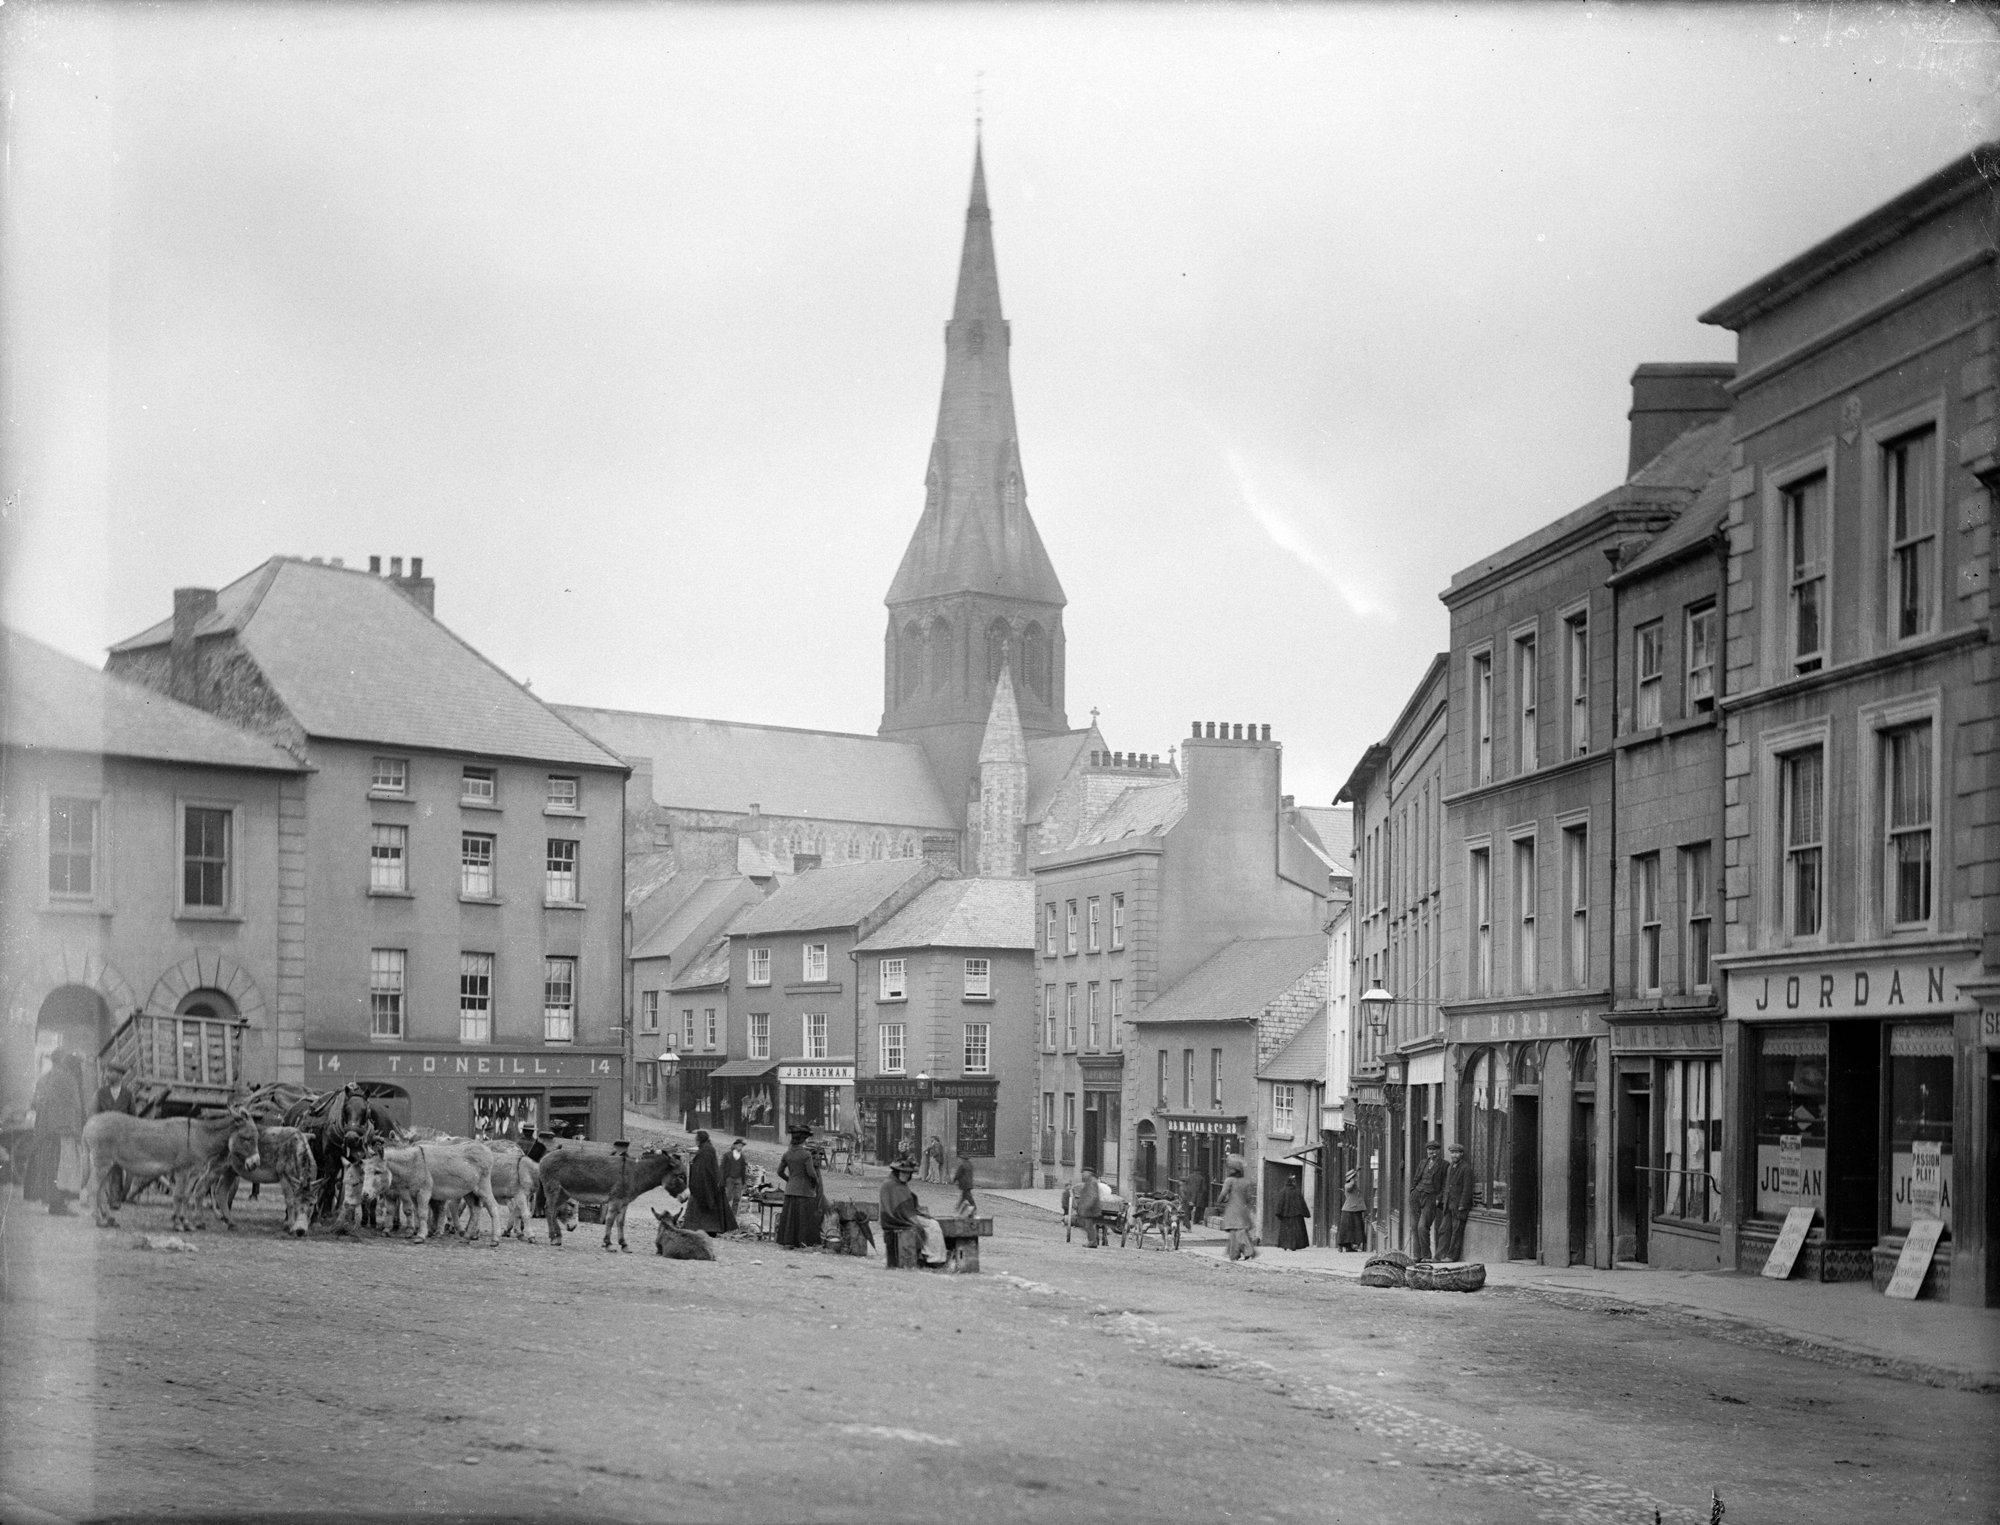 Wexford Then and Now - Vintage Photos of Wexford